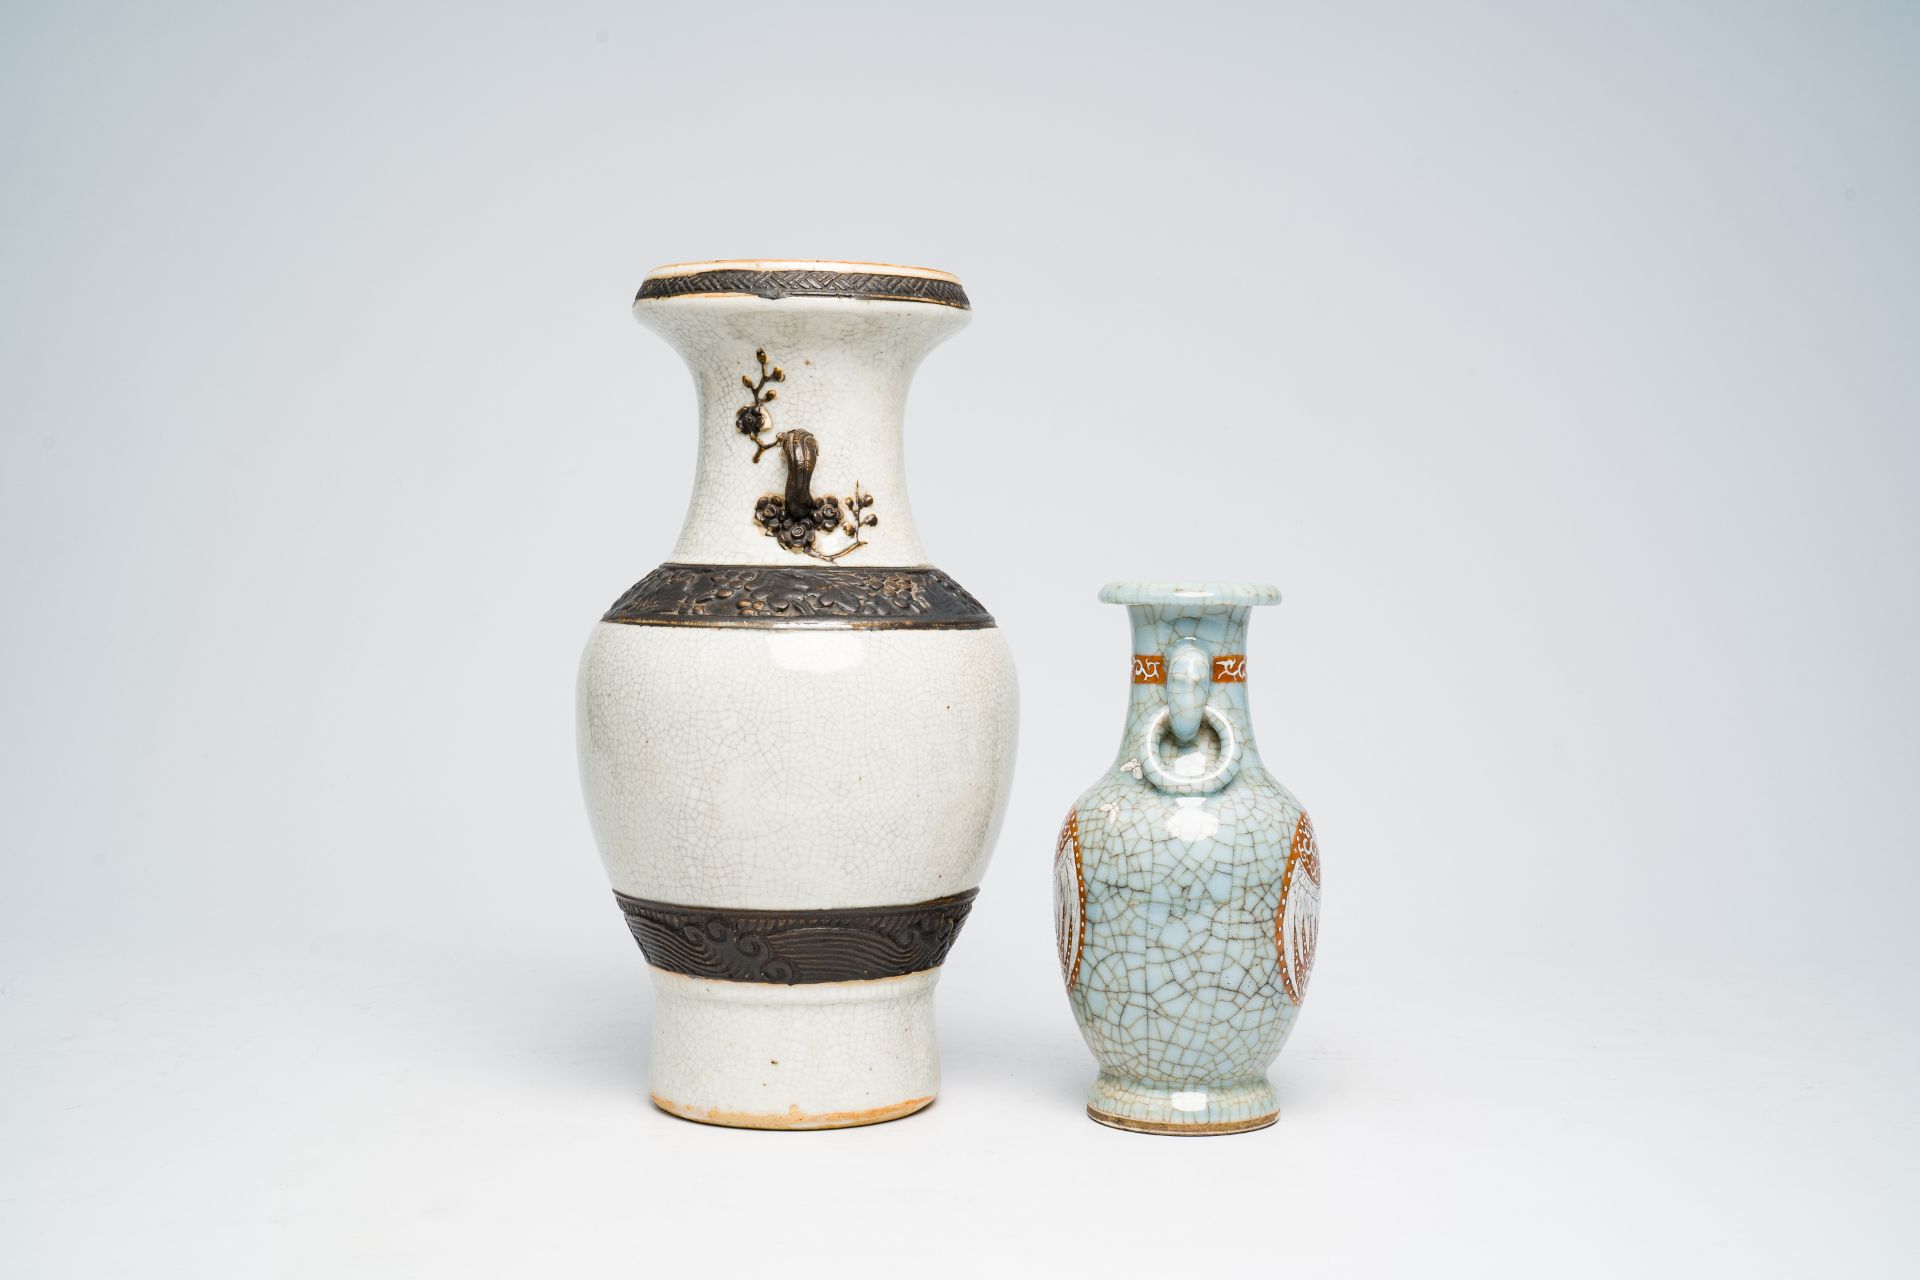 A Chinese Nanking crackle glazed vase with relief design and a polychrome celadon crackle glazed 'ph - Image 2 of 6